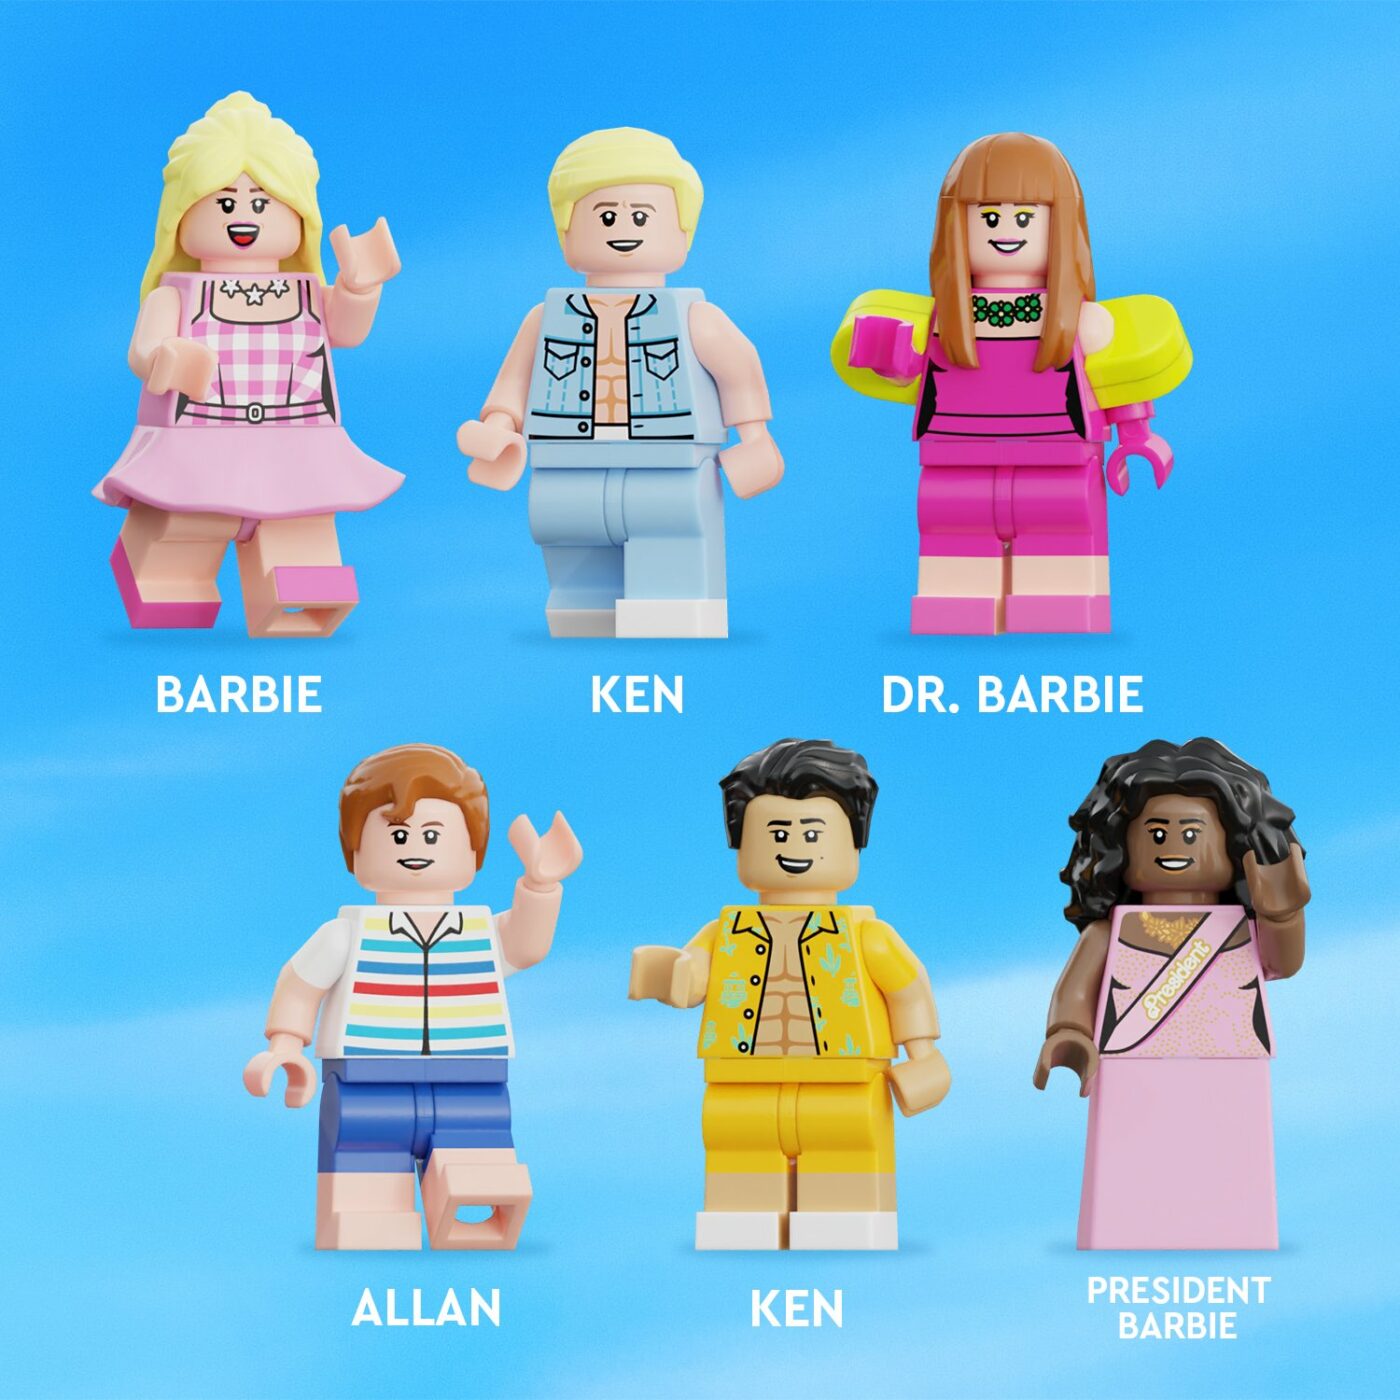 Here’s what a LEGO Barbie Movie theme could look like9